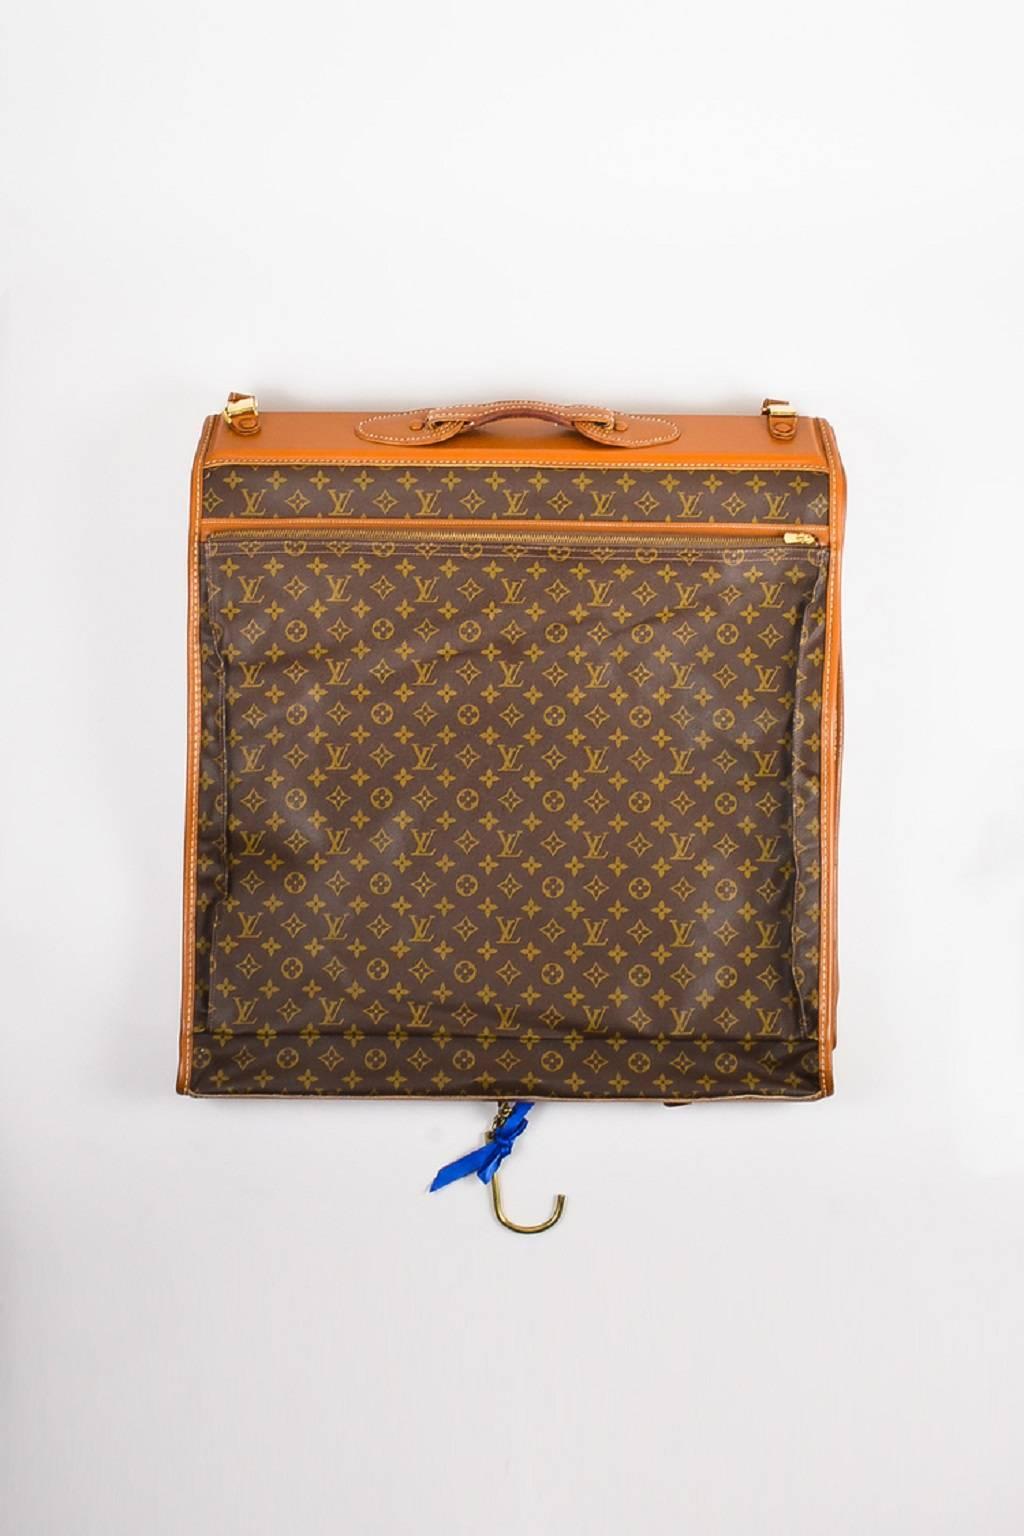 From the French Luggage Company collaboration. A piece of iconography, this luxurious garment bag from the 1970s/1980s is constructed of signature coated canvas with leather trimming. Detailed with iconic monogramming, this must-have piece of